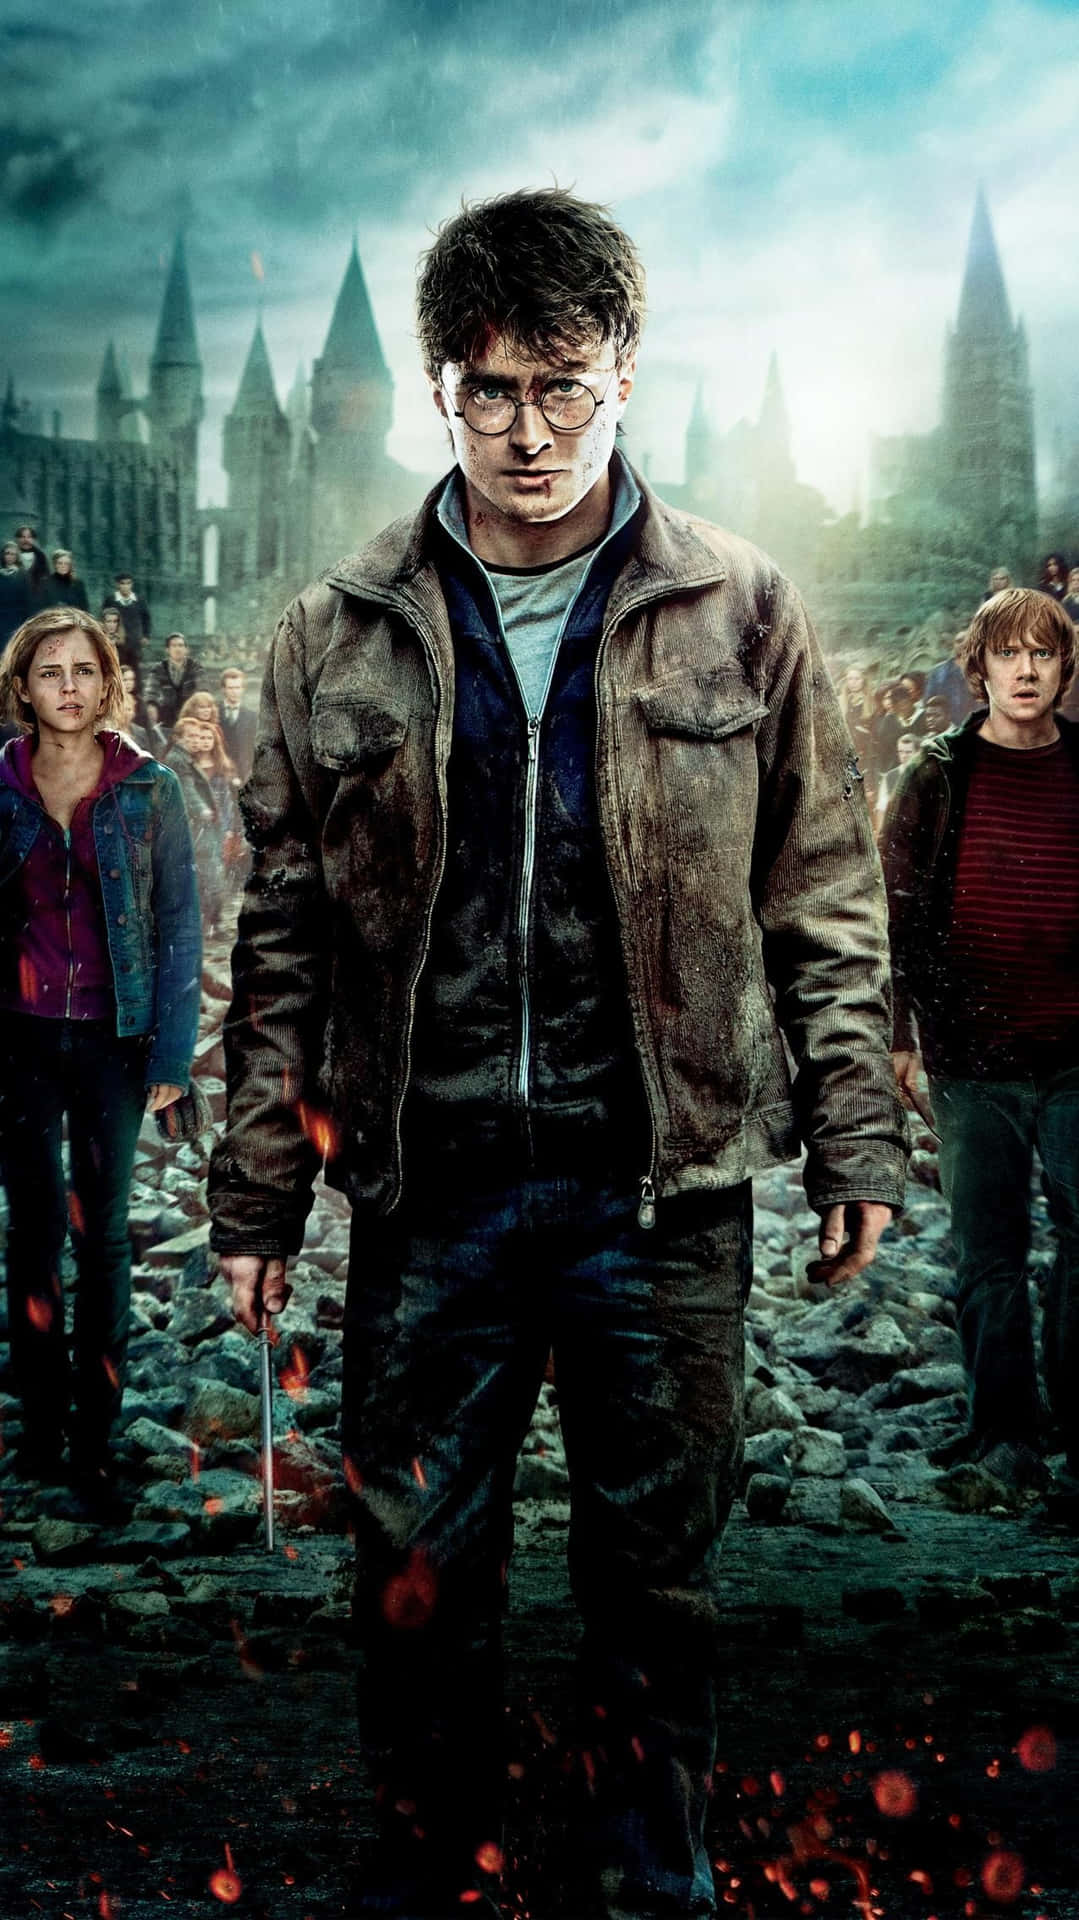 Dengyllene Triaden (for A Computer Or Mobile Wallpaper Featuring The Three Main Characters From Harry Potter) Wallpaper